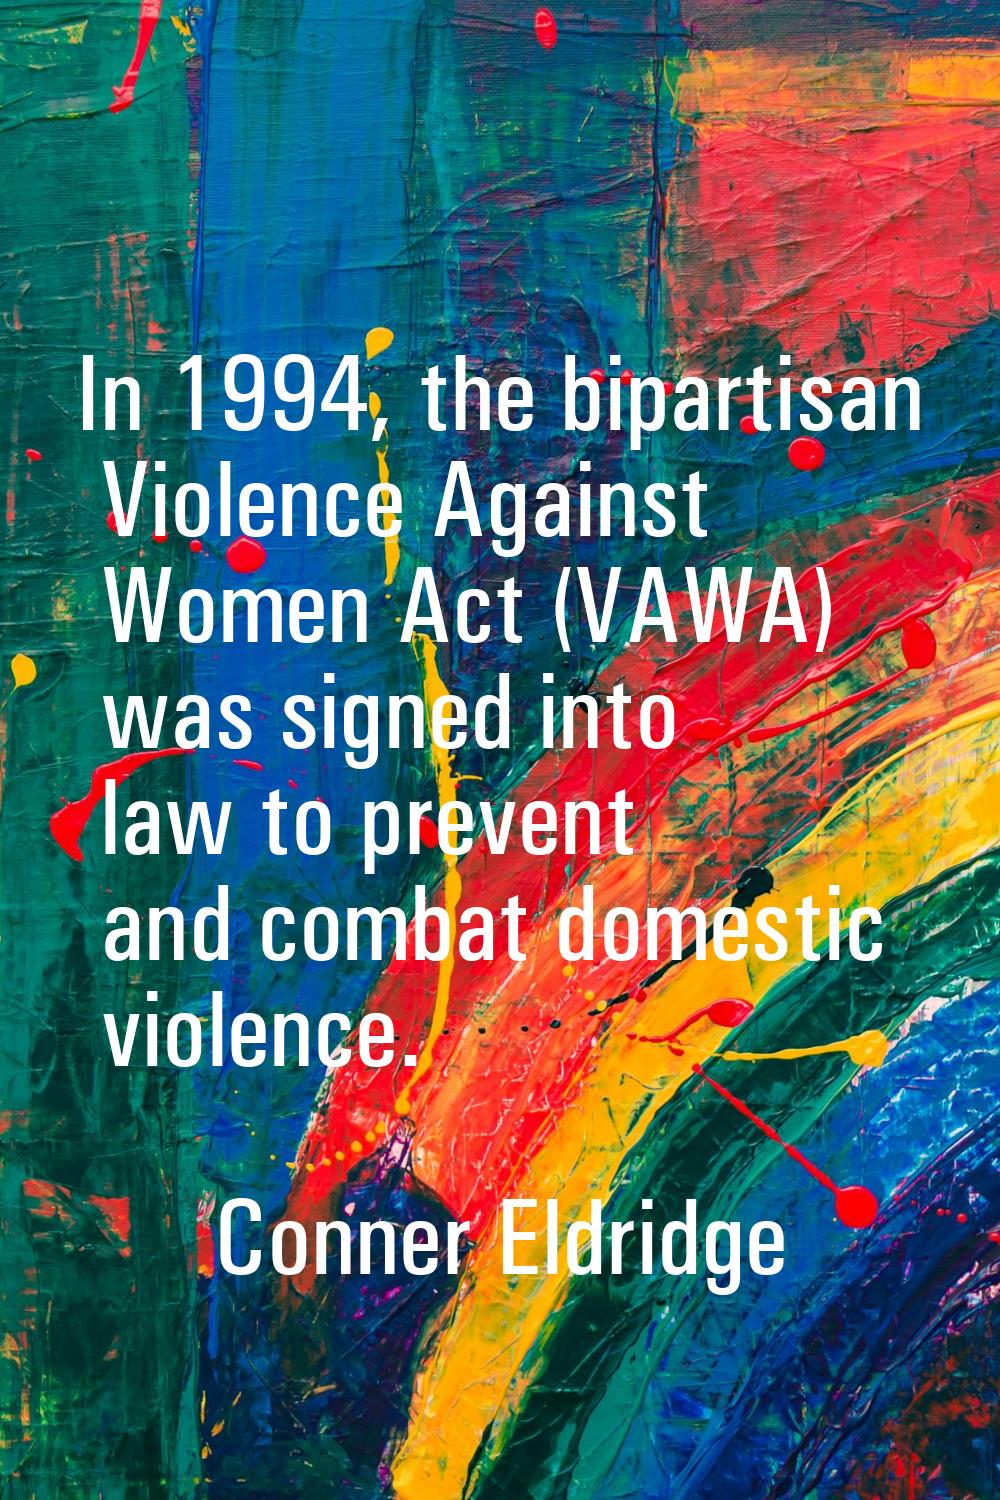 In 1994, the bipartisan Violence Against Women Act (VAWA) was signed into law to prevent and combat